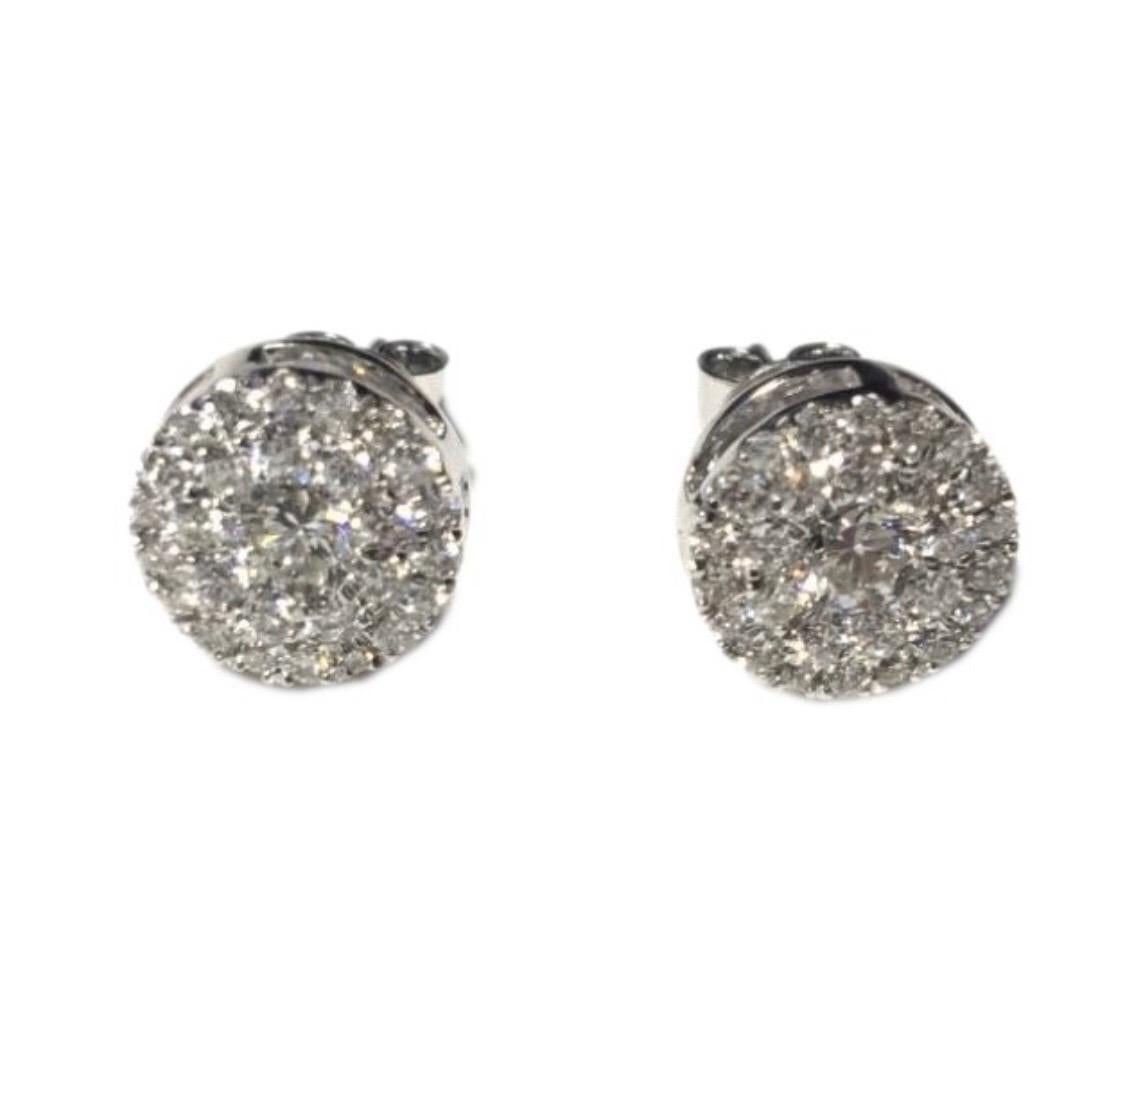 These elegant Round Brilliant Cut Diamond cluster stud earrings featuring white eye clean color H clarity SI diamonds that sparkle, set in 18 Karat White Gold. These button shaped pave set cluster studs have a total diamond weight of 1.00 Carat and